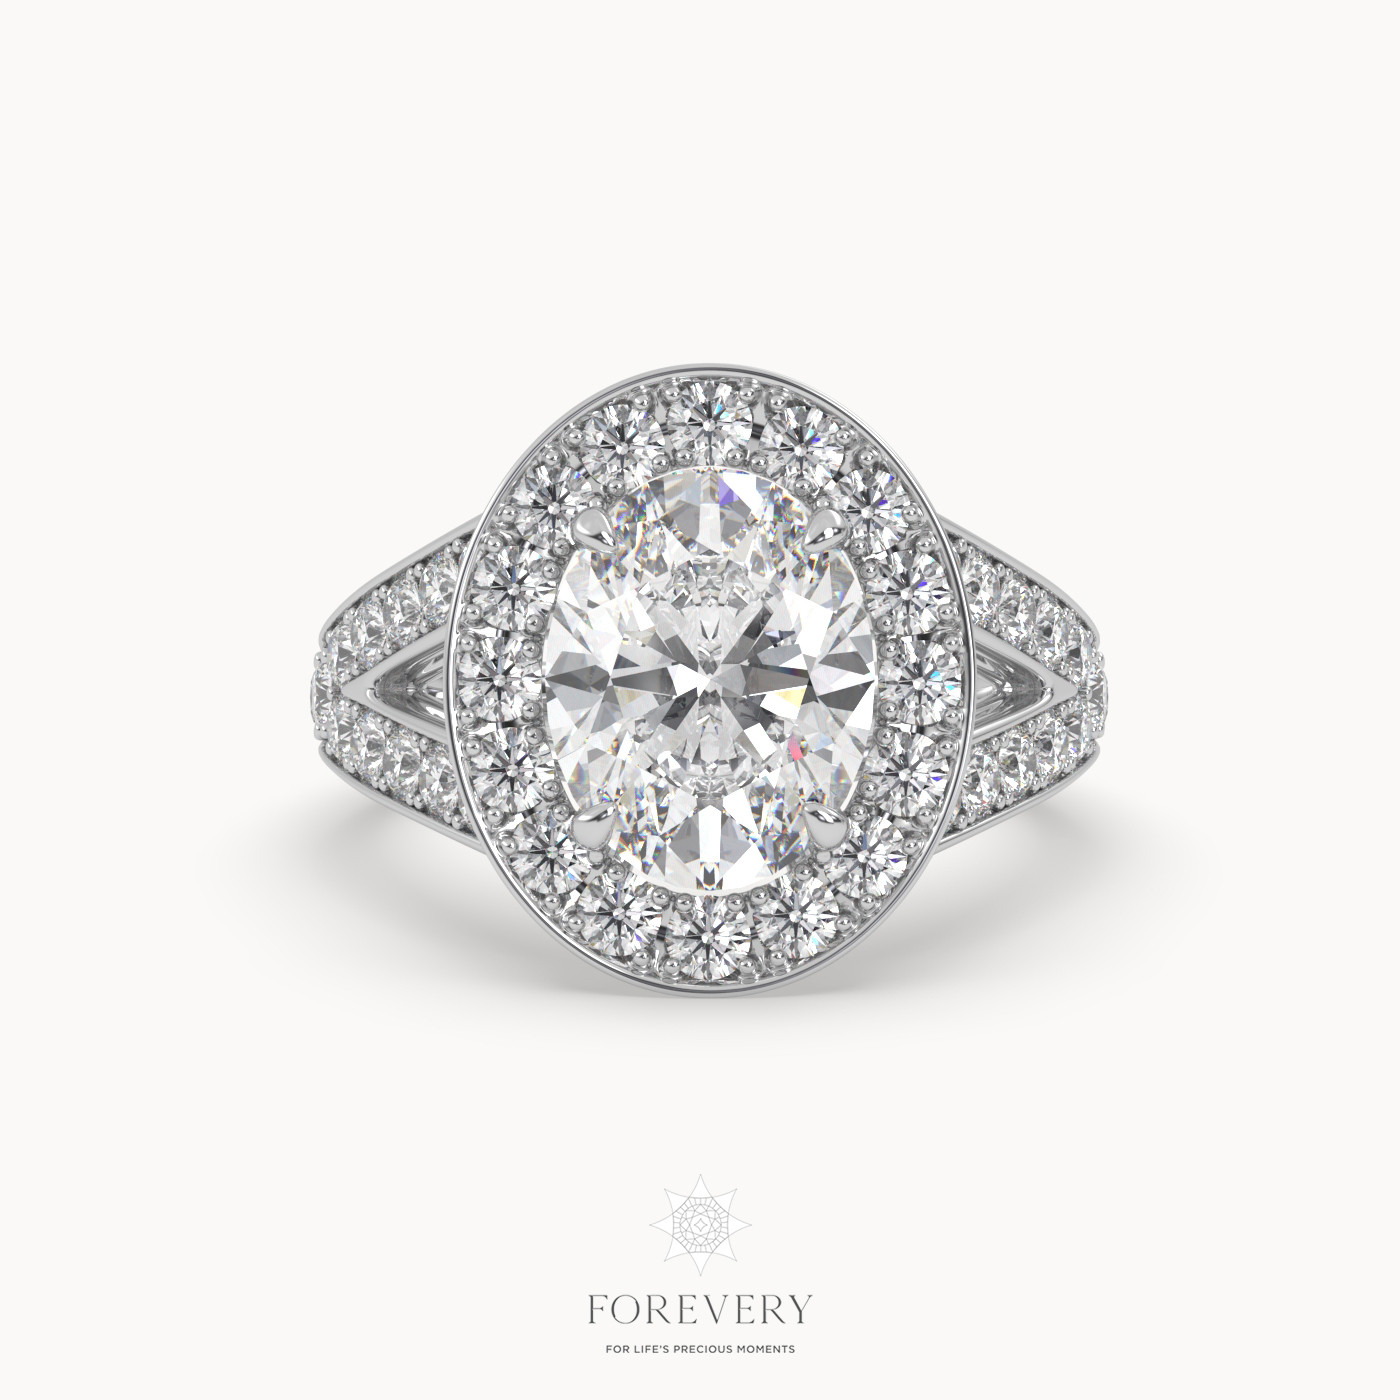 Engagement Rings for Women - 10 Things to Keep in Mind